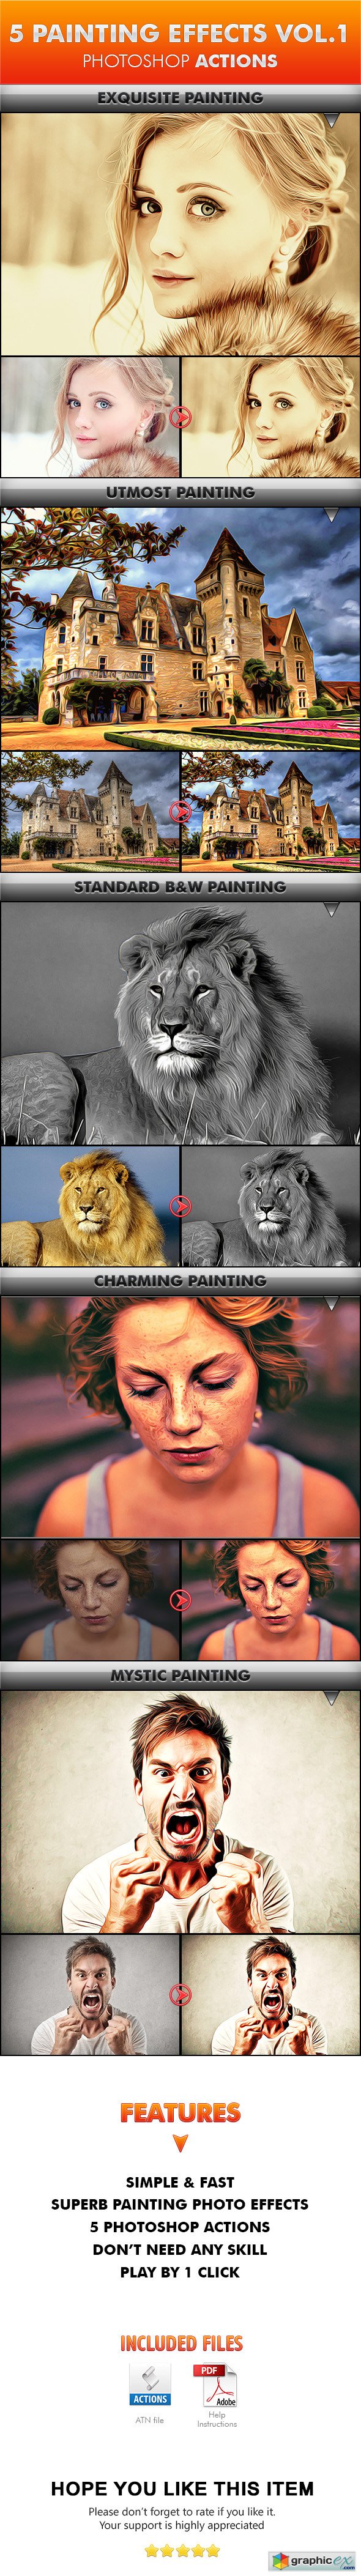 5 Painting Effects Vol.1 Photoshop Actions